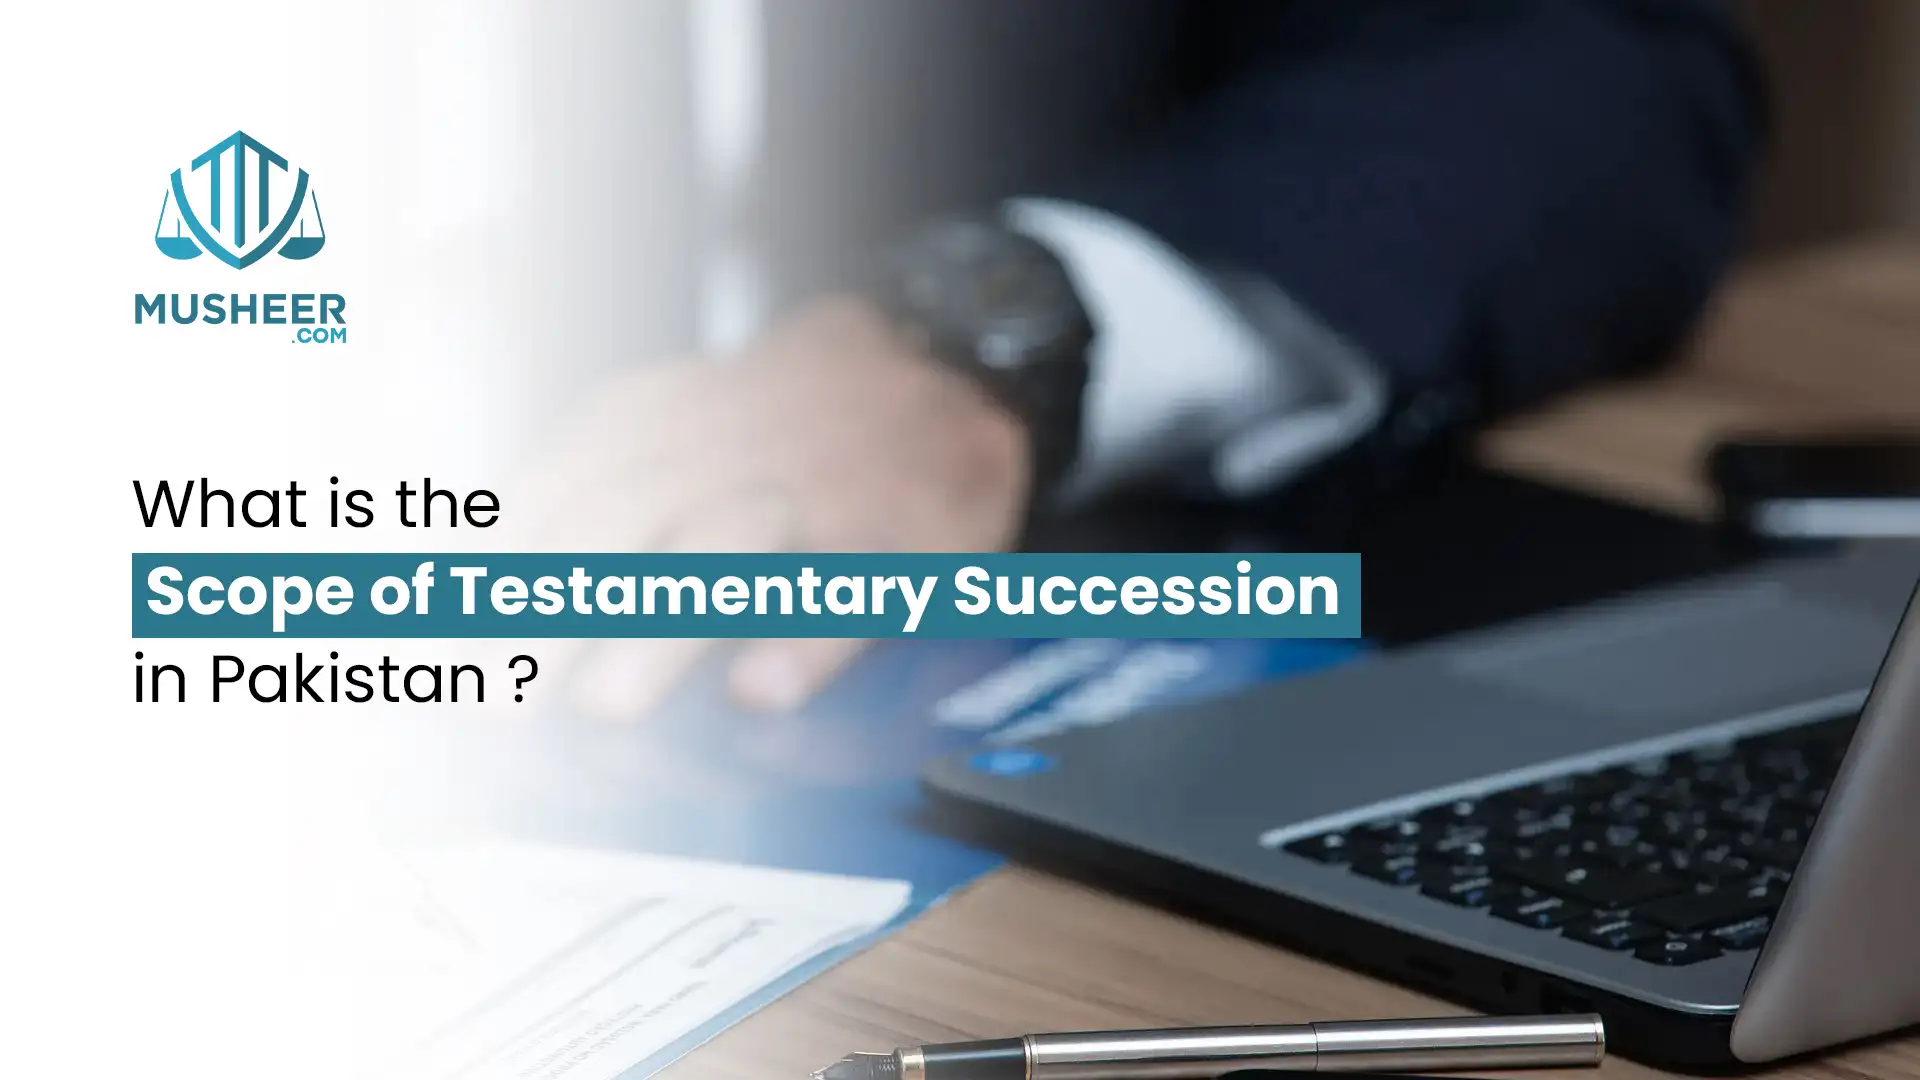 What is the scope of Testamentary Succession in Pakistan